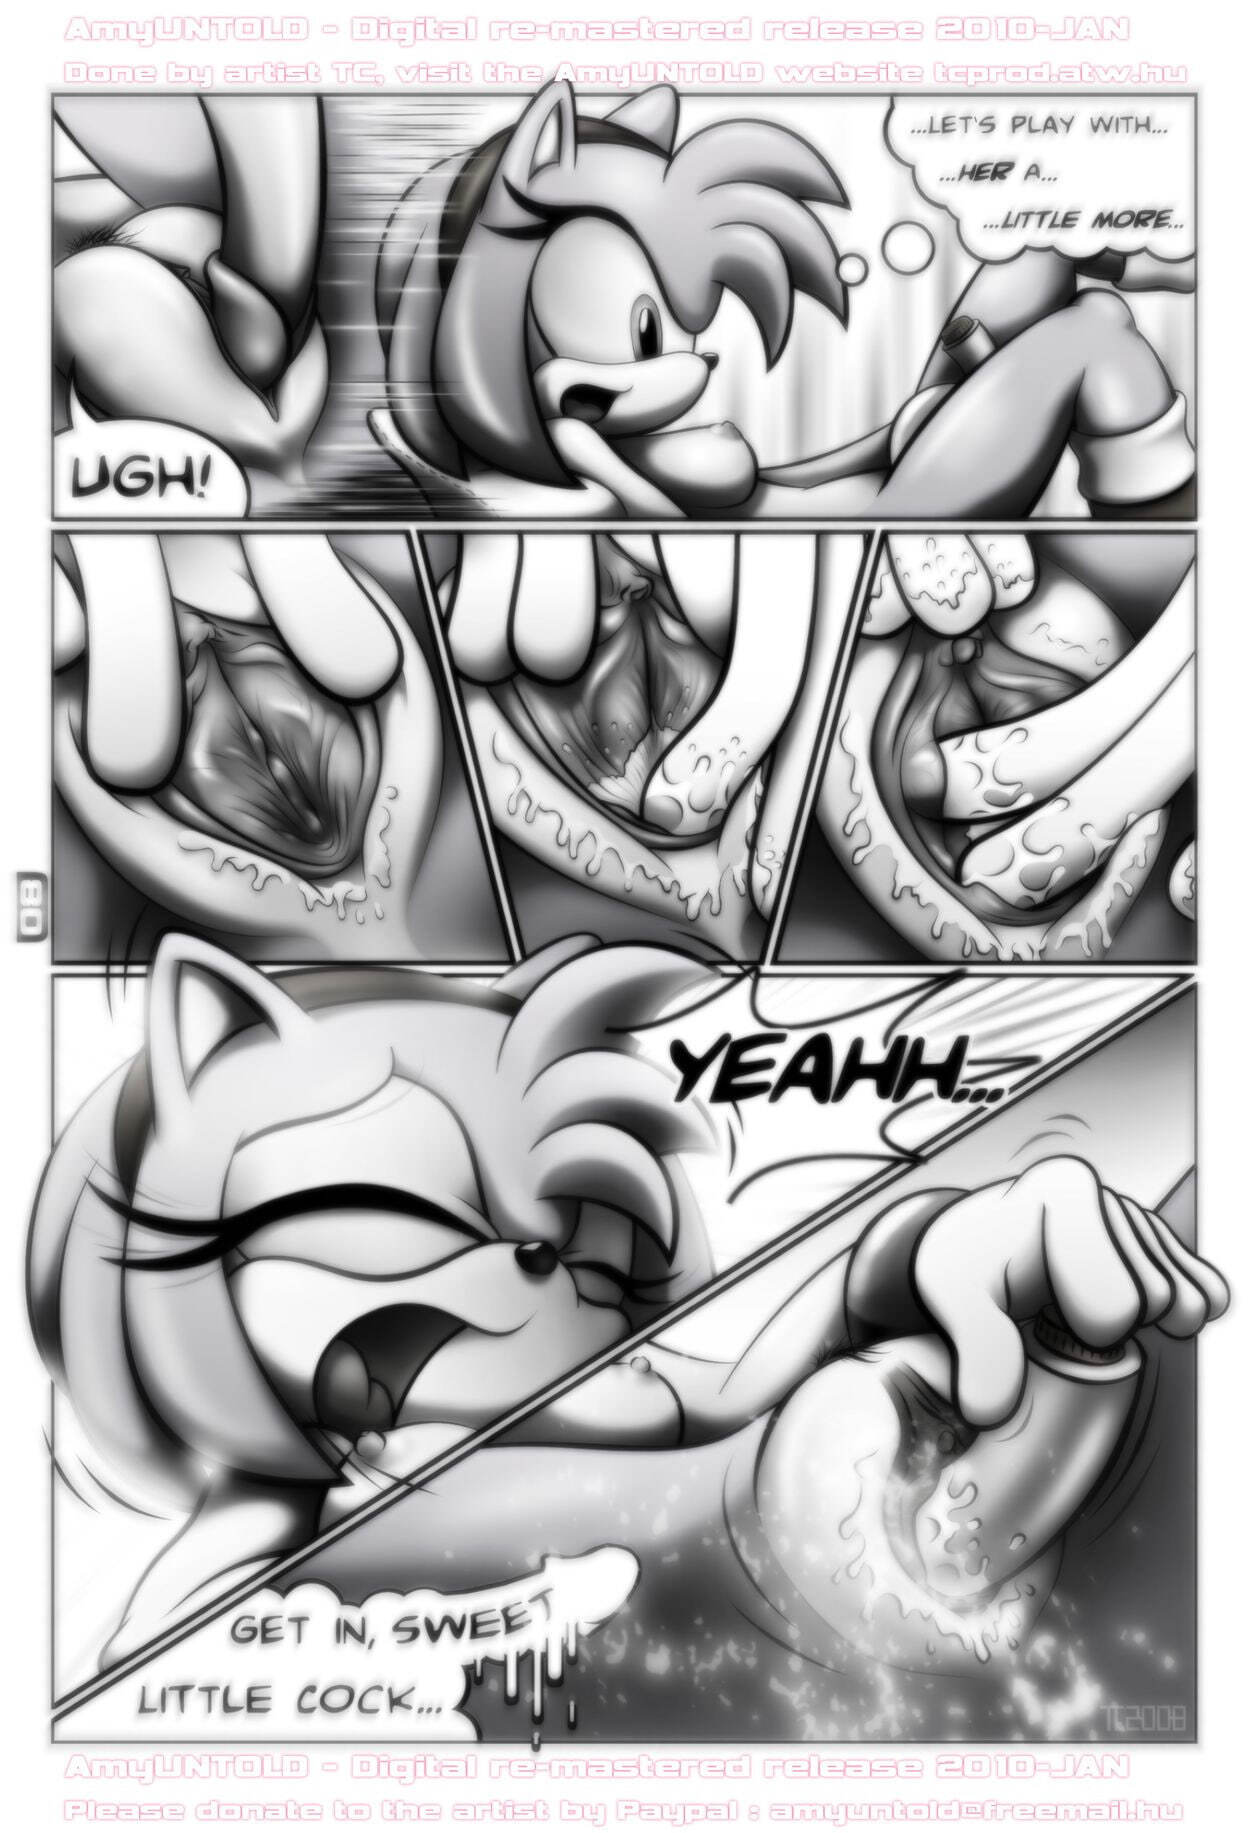 Amy Untold - Finally - Page 8